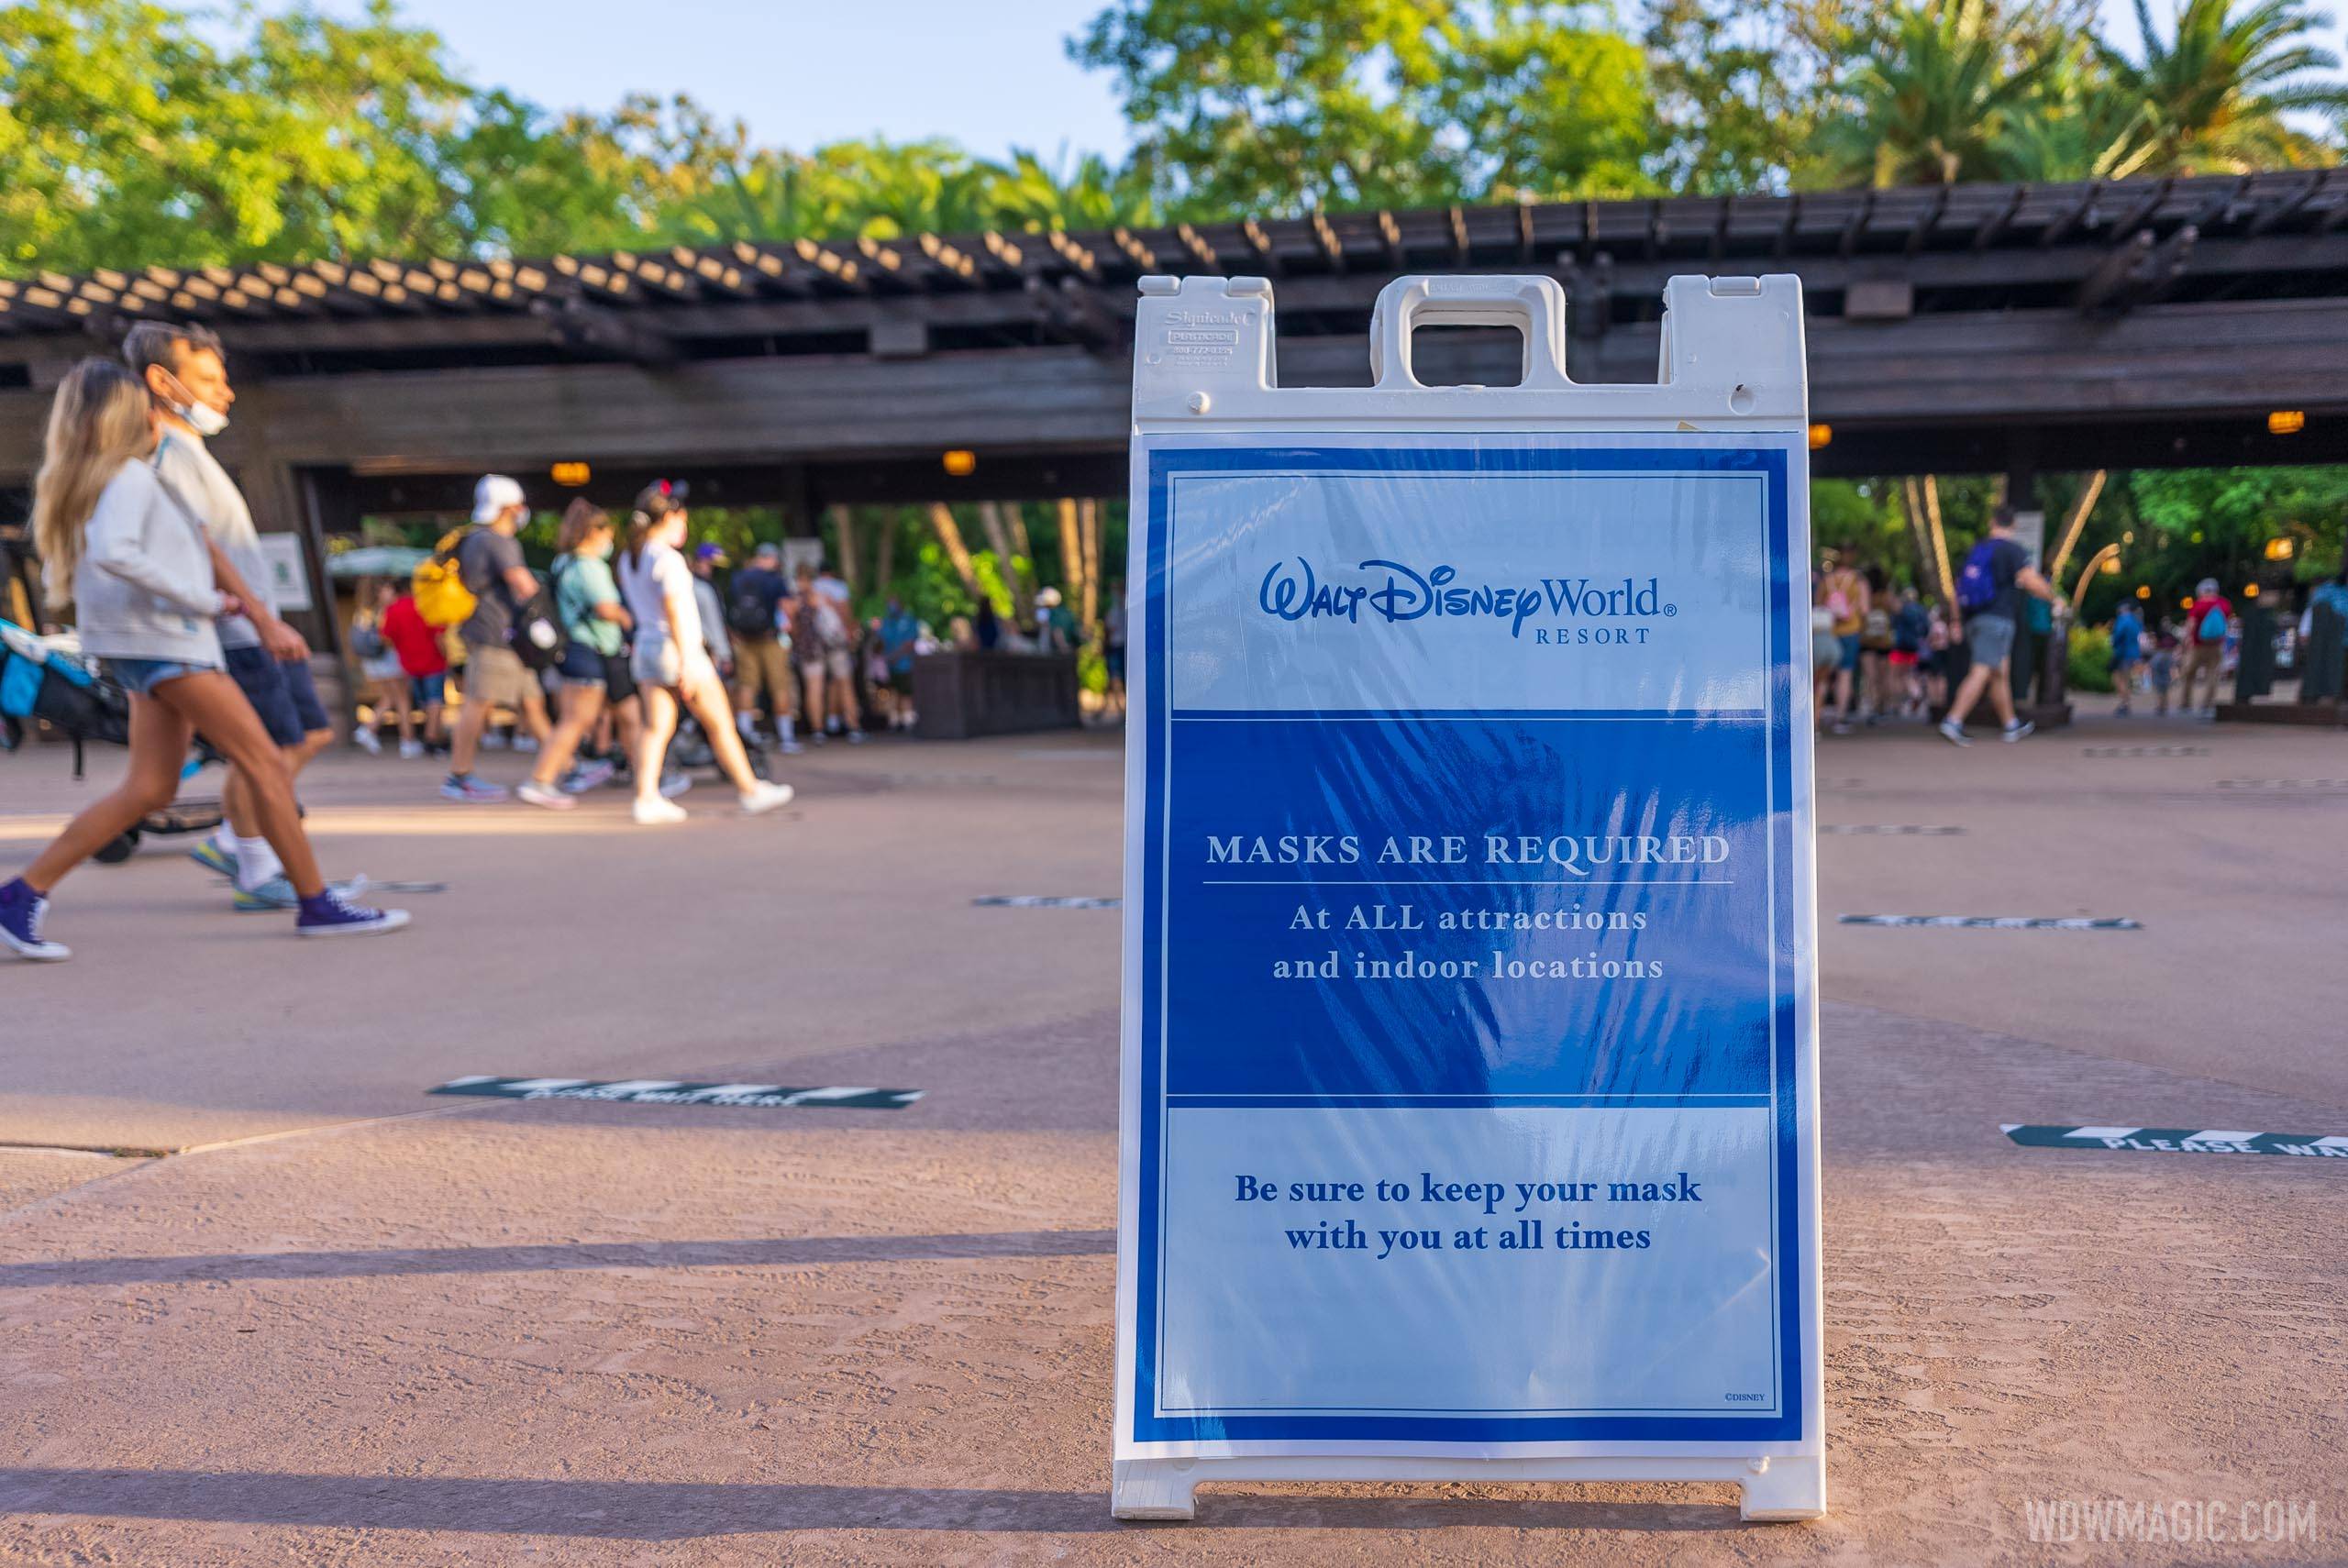 Signage from May 2021 when Disney relaxed outdoor masking but still required indoor masking